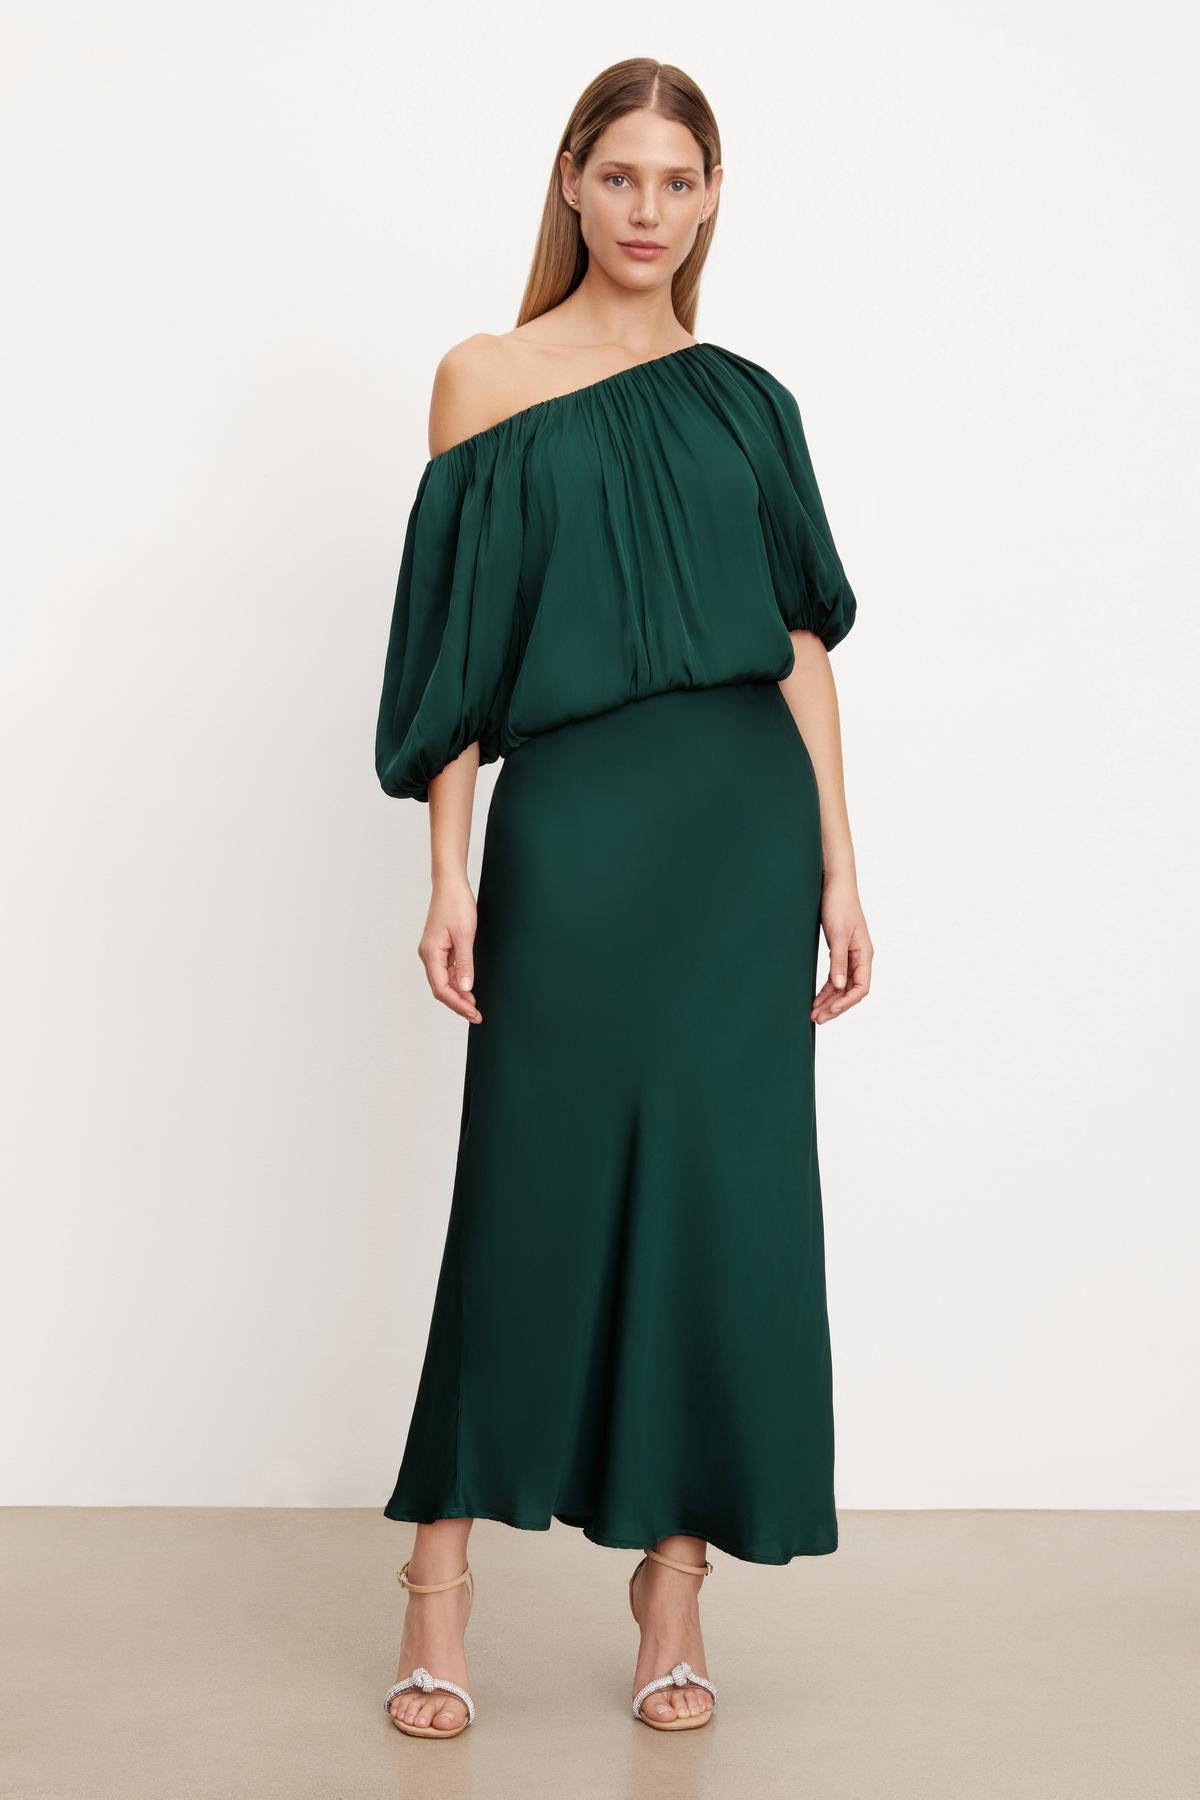 The TAMI SATIN PUFF SLEEVE TOP by Velvet by Graham & Spencer features an emerald green off the shoulder midi dress with a satin viscose fabric and a cropped top.-35654471286977